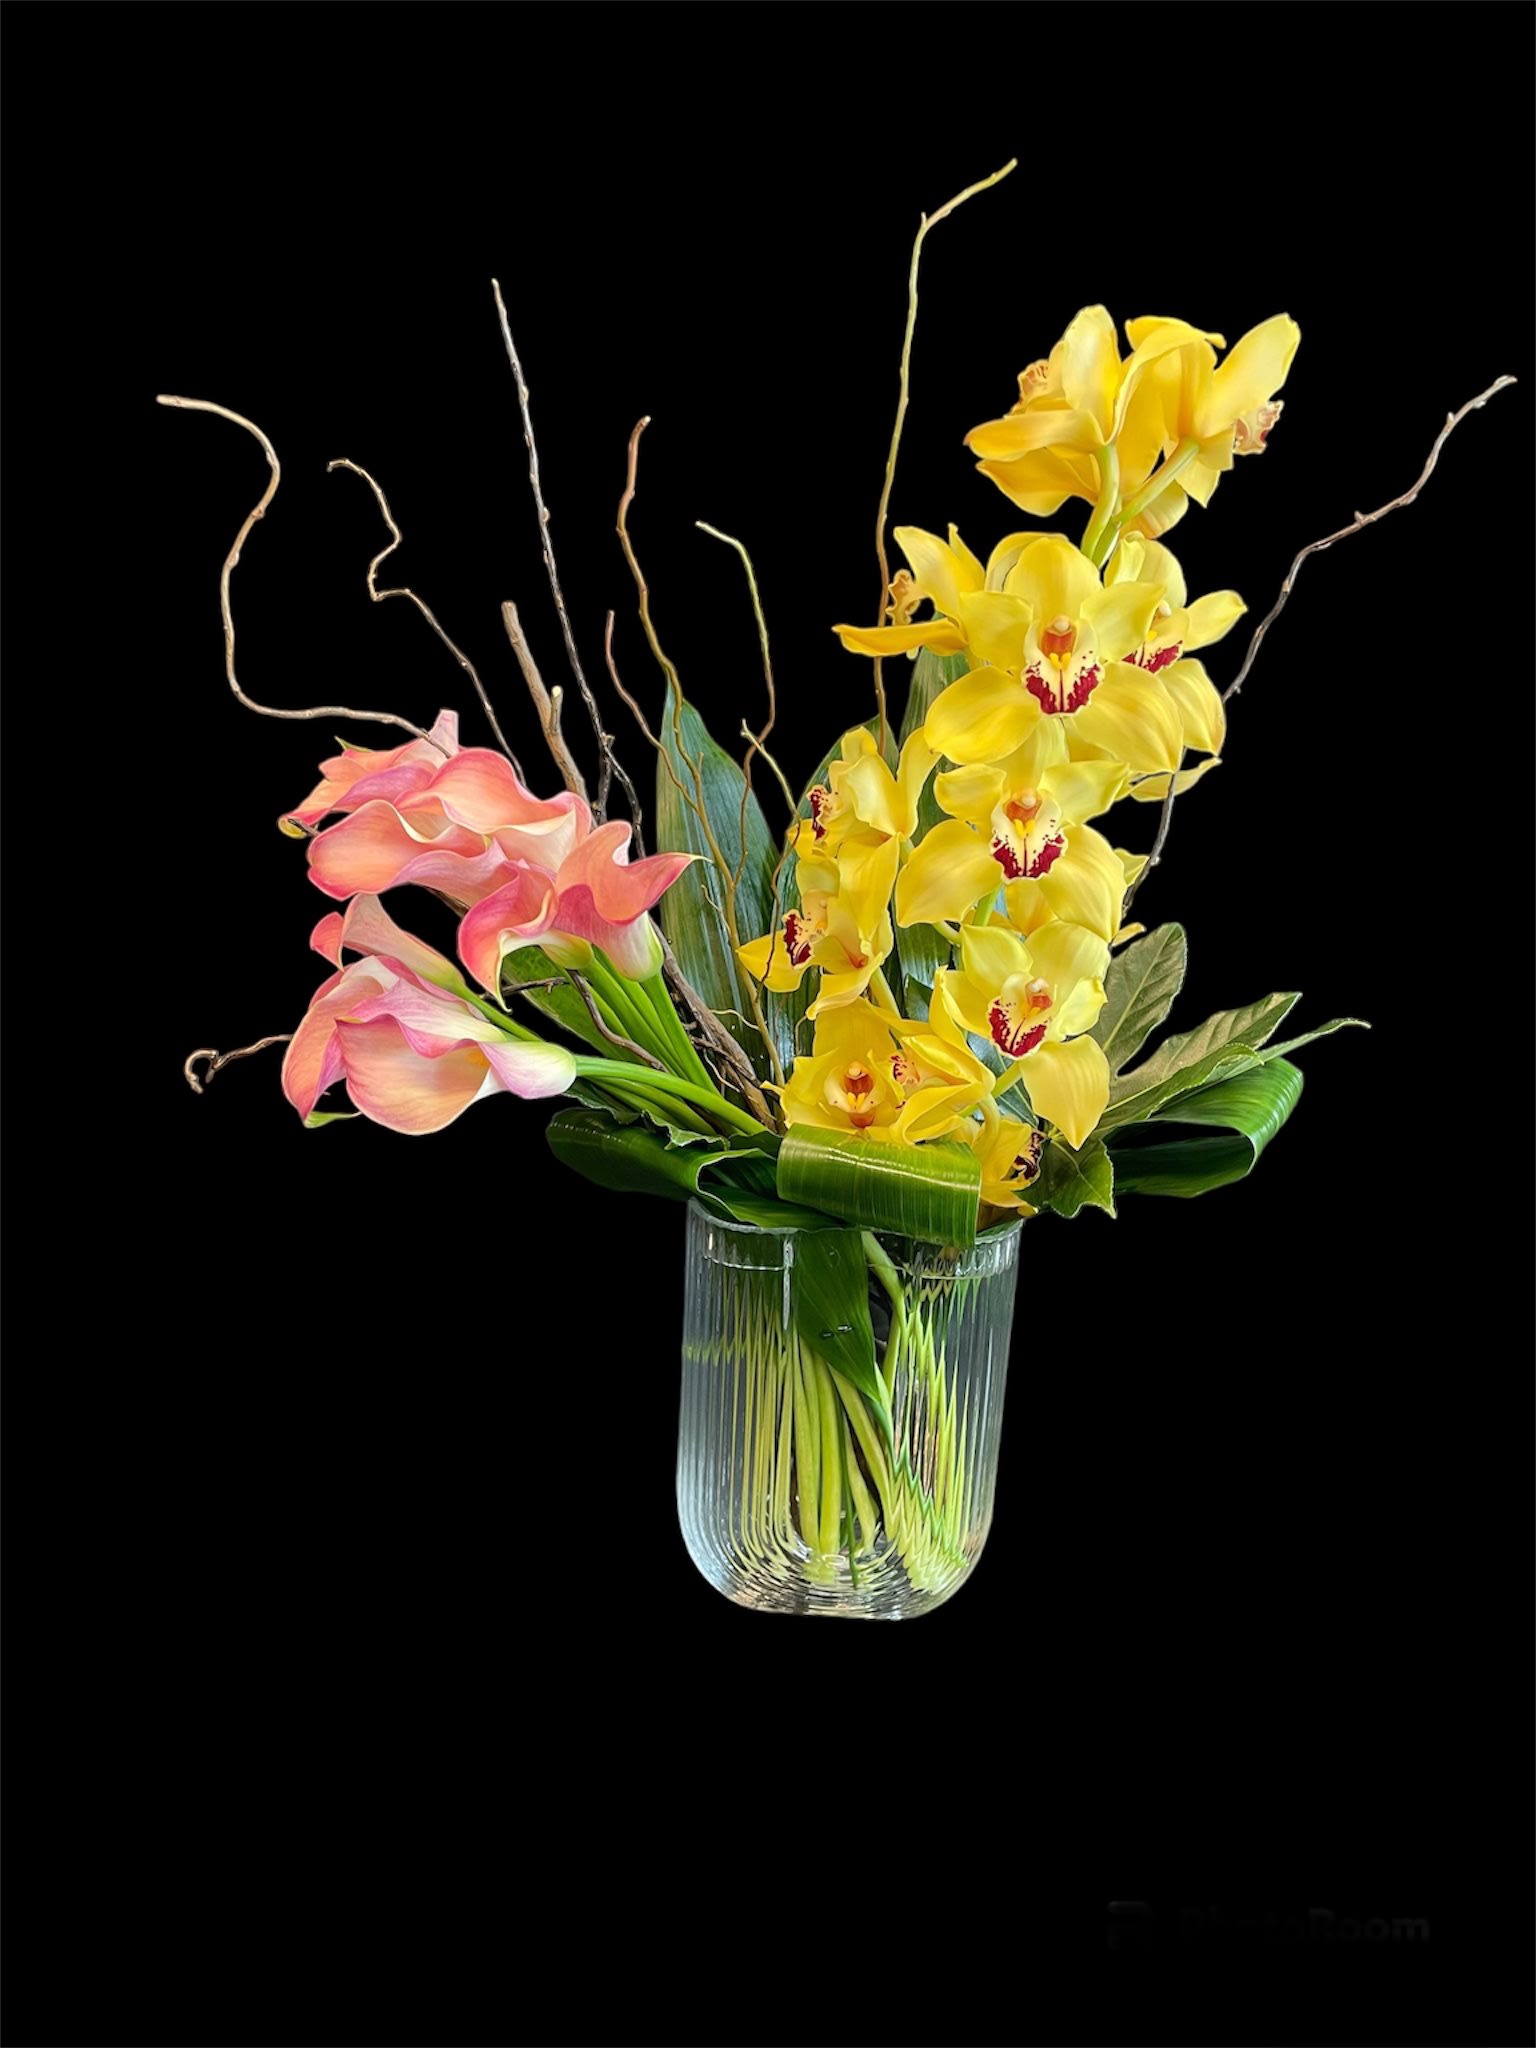 Soft Touch - Half Moon Vase with one yellow Cymbidium Orchid and 10 ligth oink callas along with Mix aspedistrea leaf 